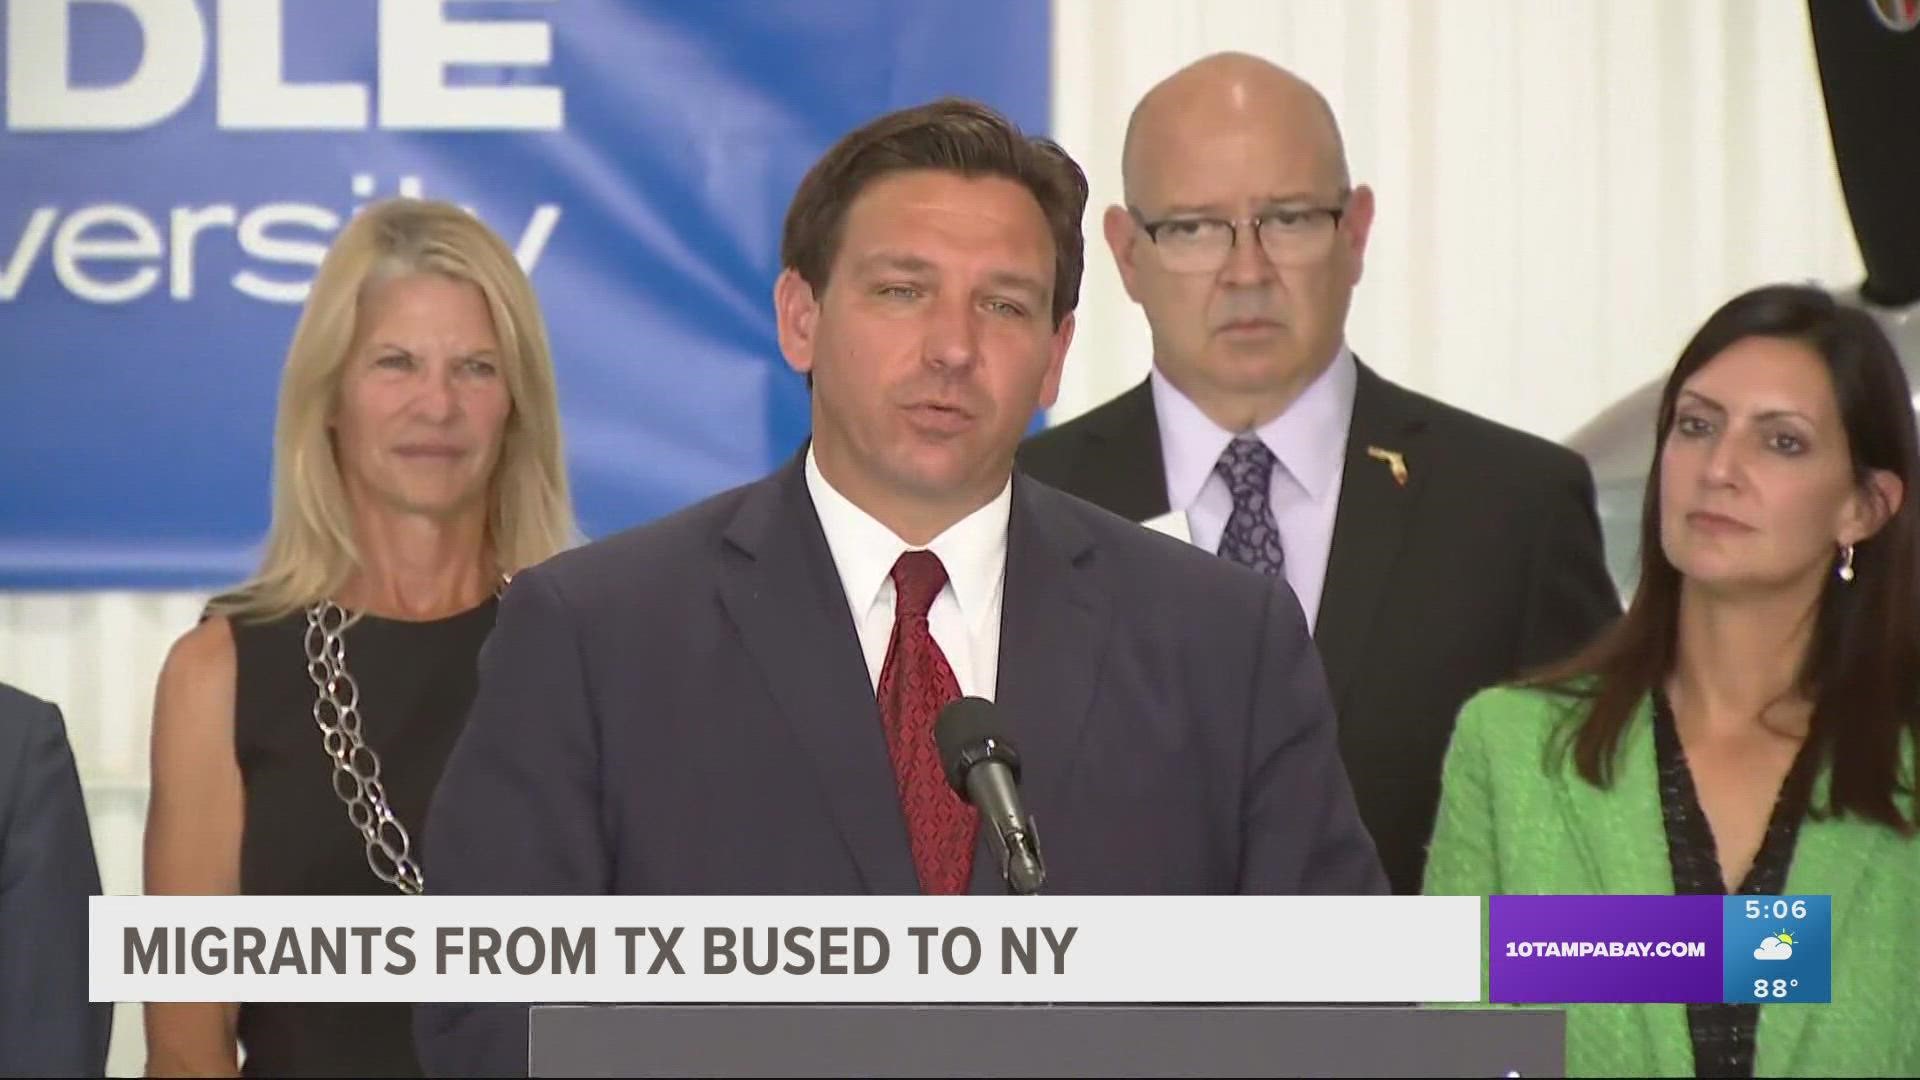 Democrats say Florida Gov. Ron DeSantis is wrongly using taxpayer money to transport migrants to other places.